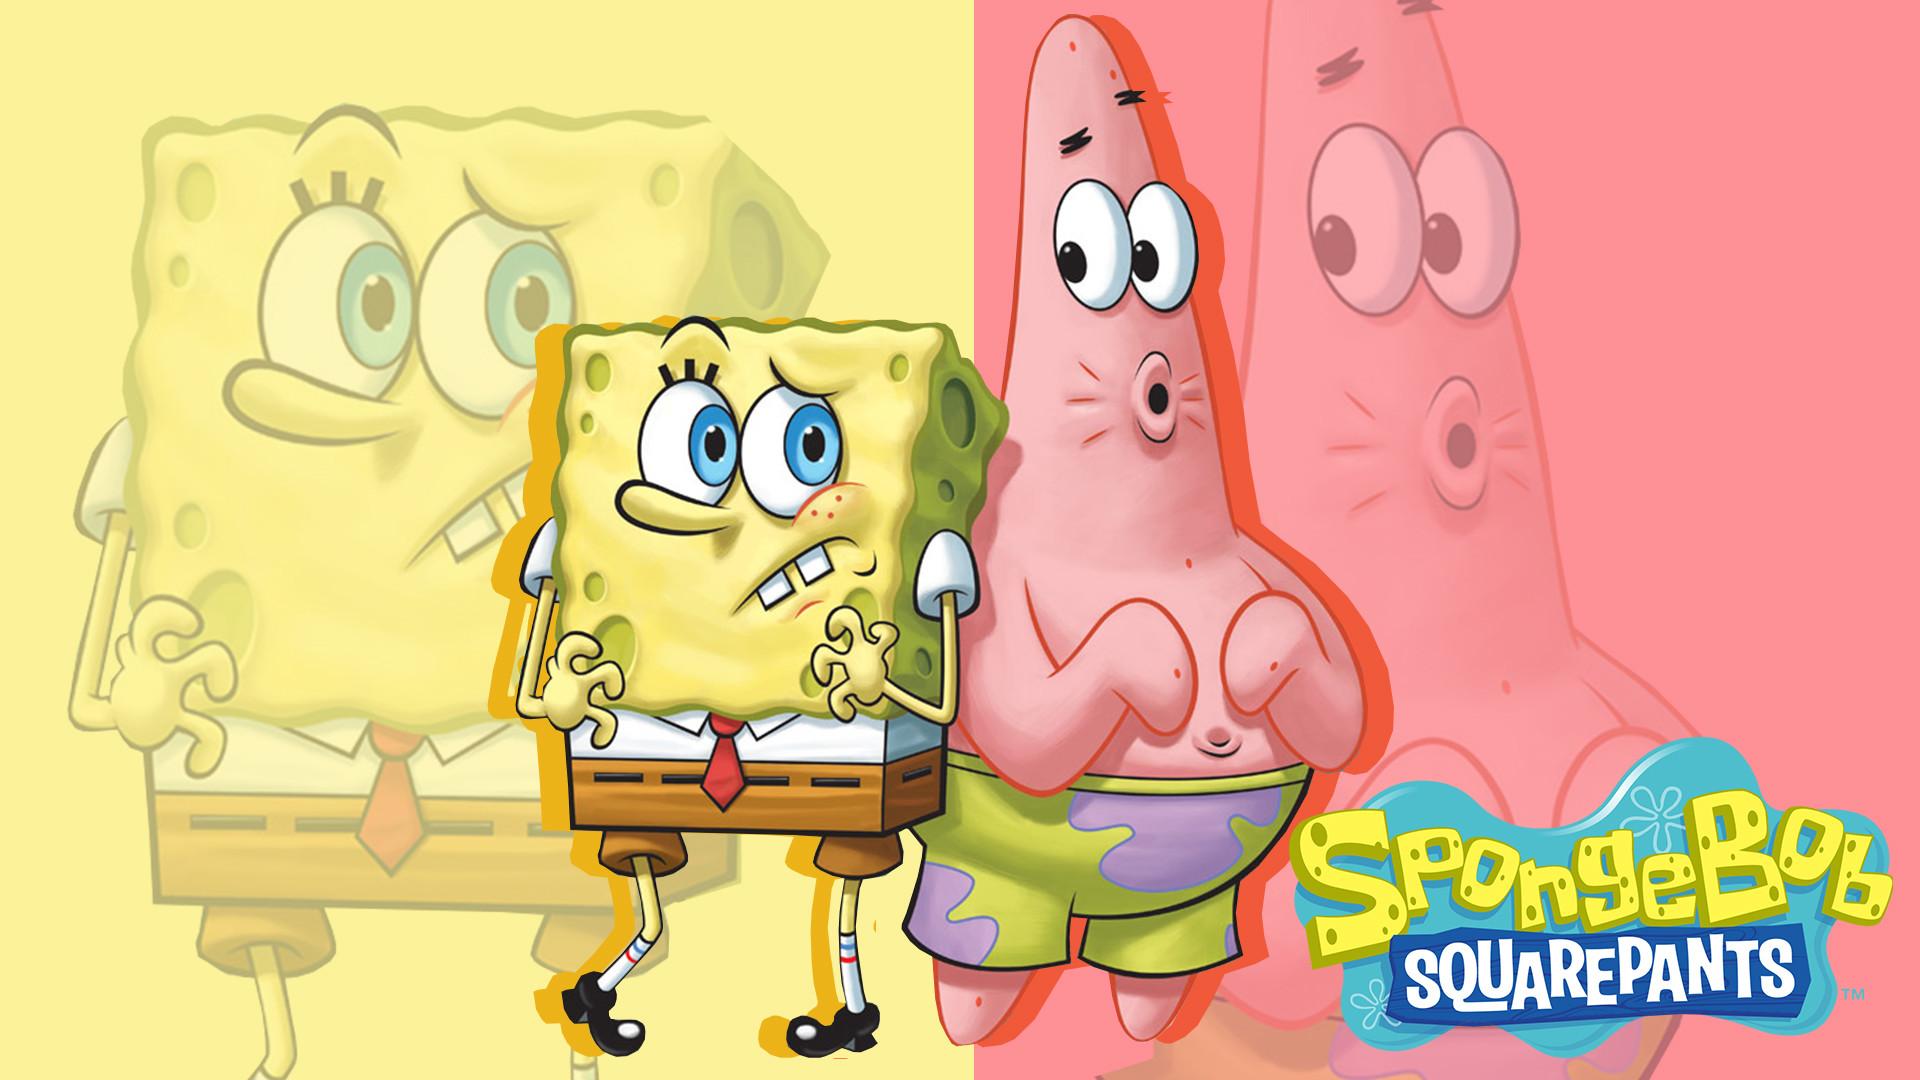 Just Out This Wallpaper Of Spongebob